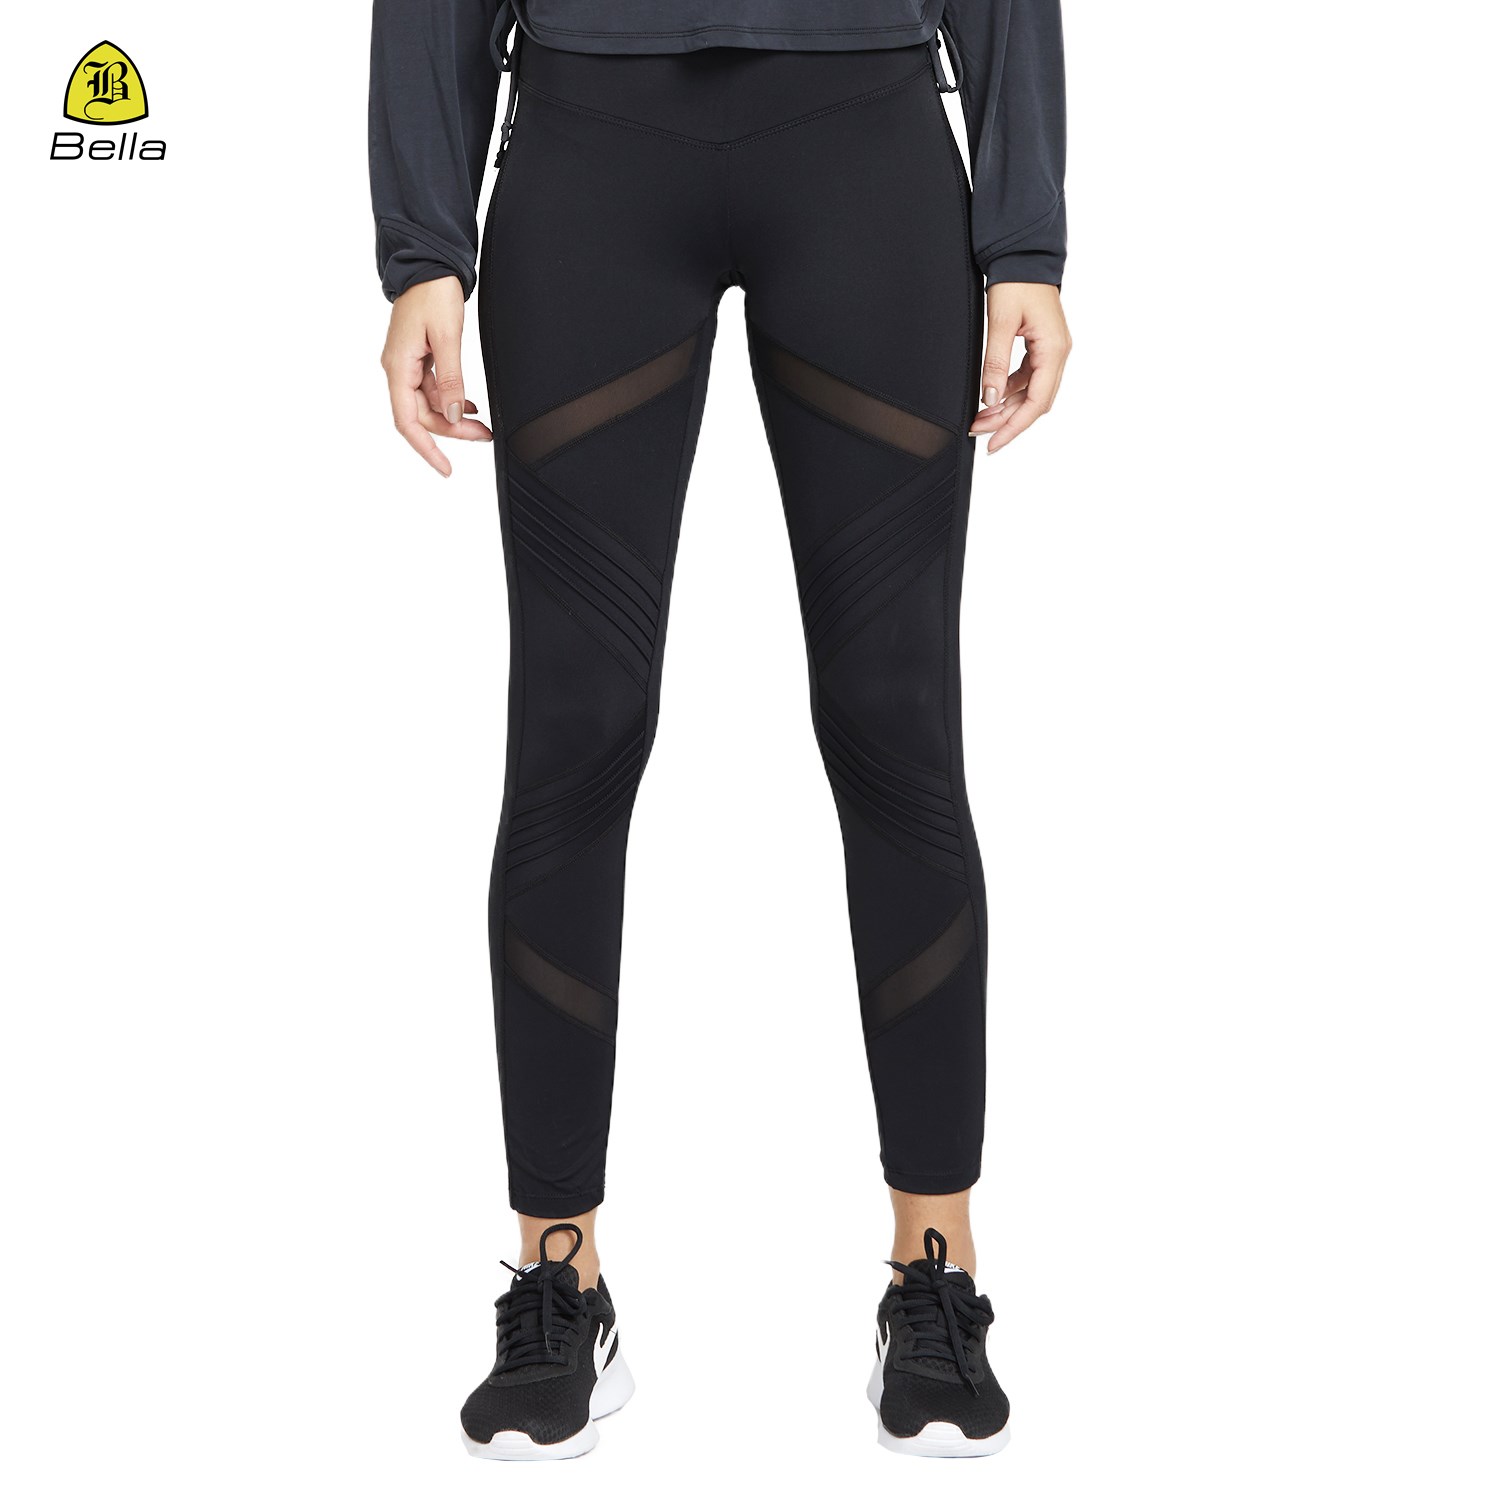 Fashionable Breathable Comfy Soft Compression Yoga Pants With Hidden Pocket